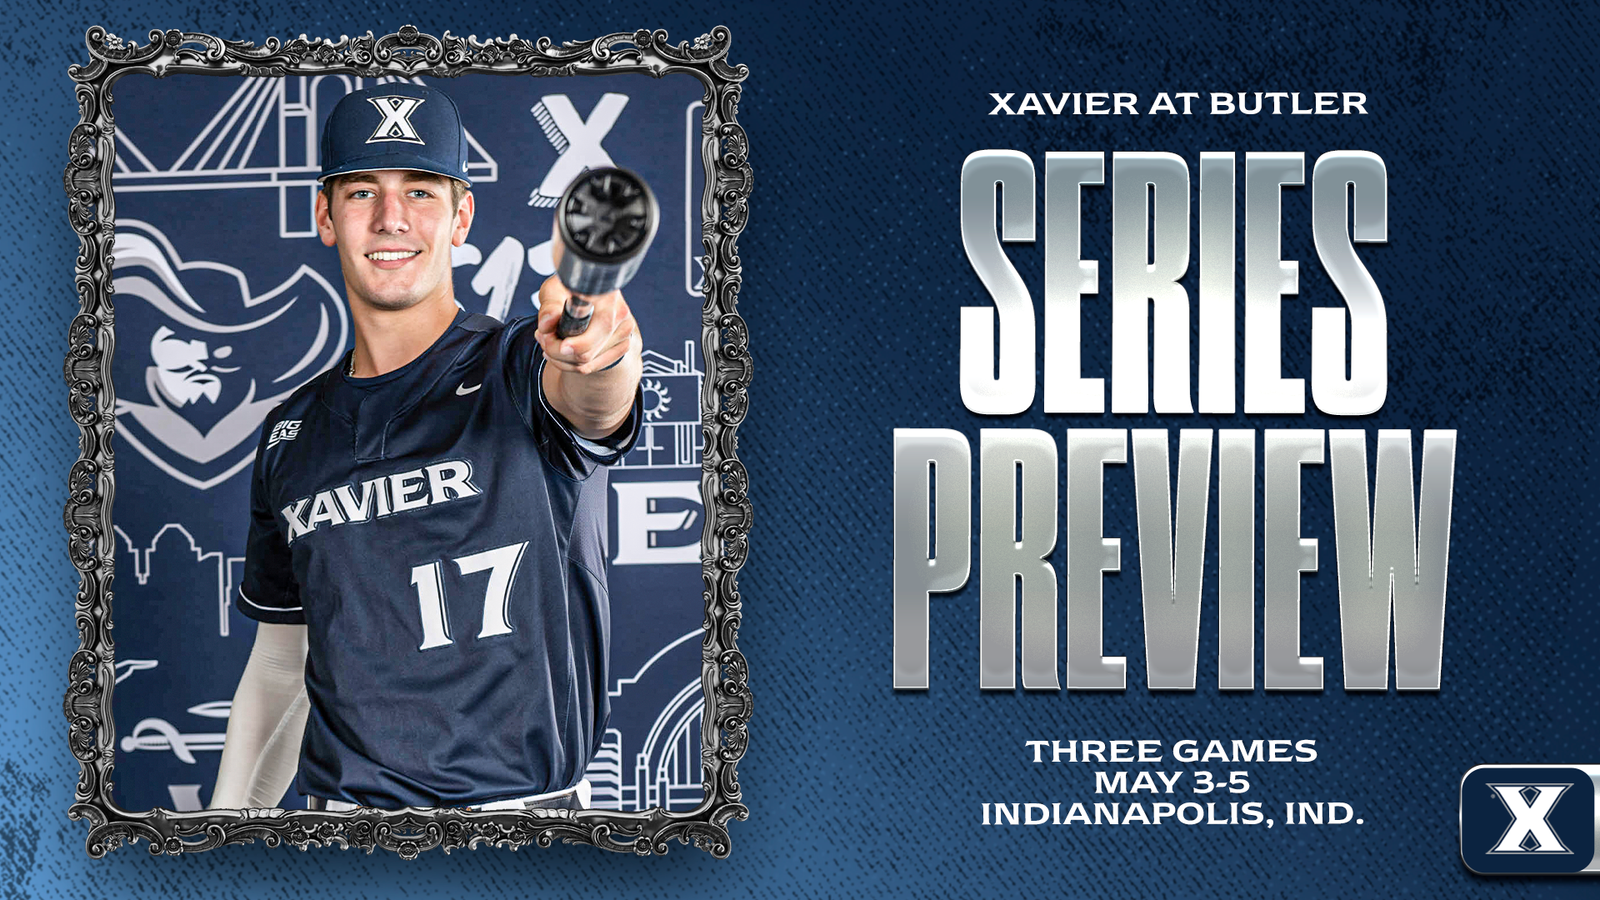 Baseball Travels to Indy for Three-Game Series at Butler